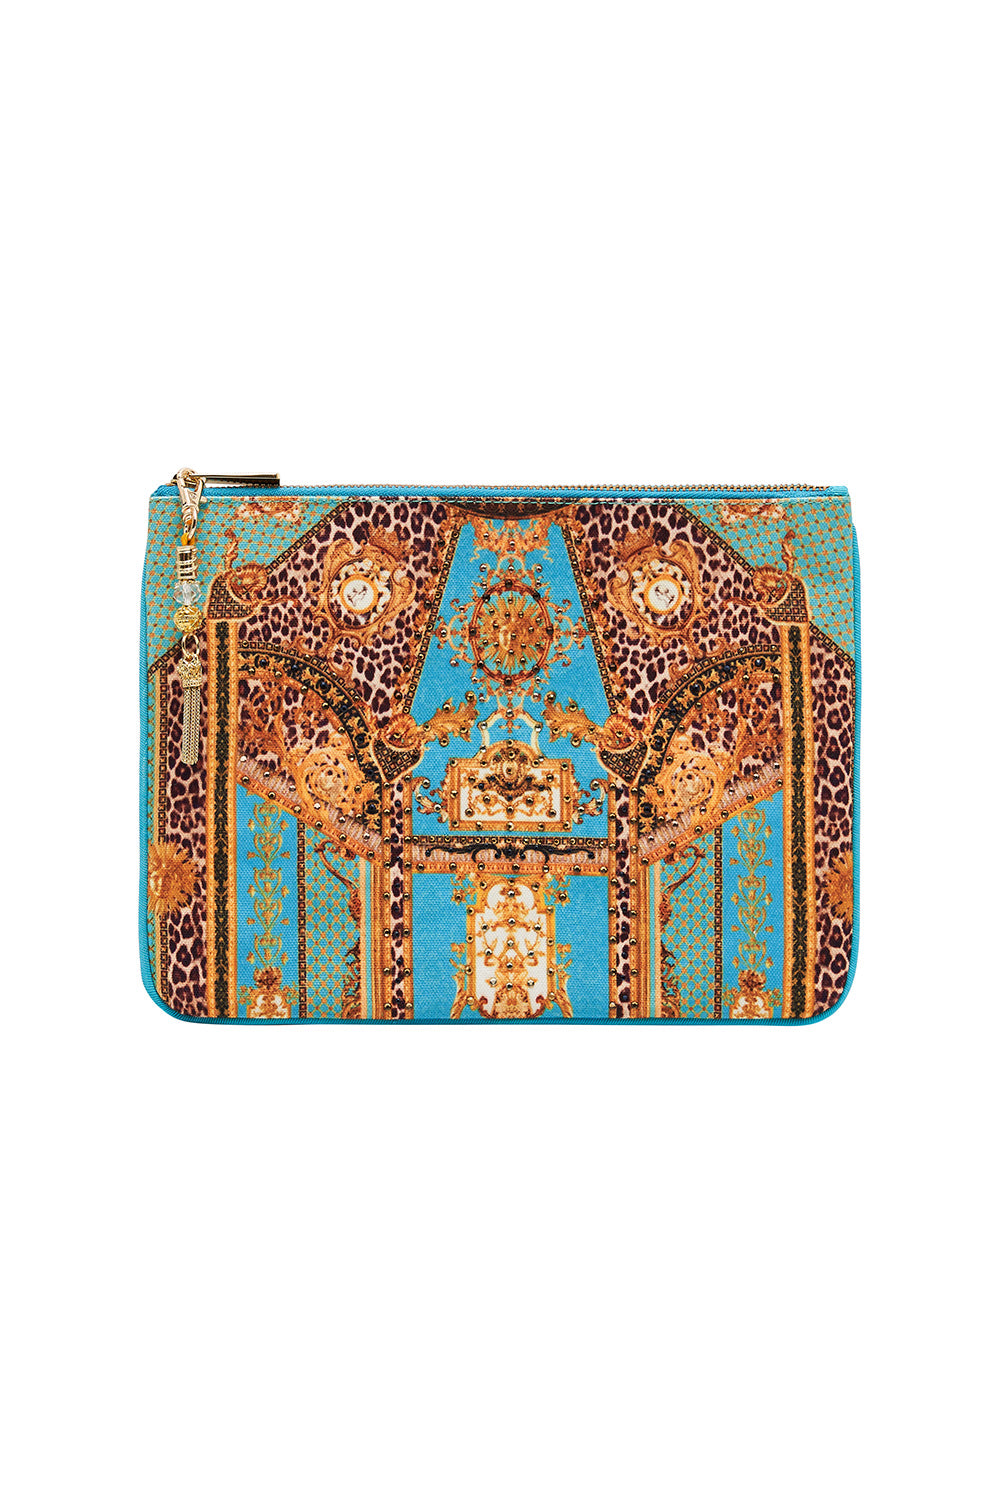 SMALL CANVAS CLUTCH DRIPPING IN DECADENCE